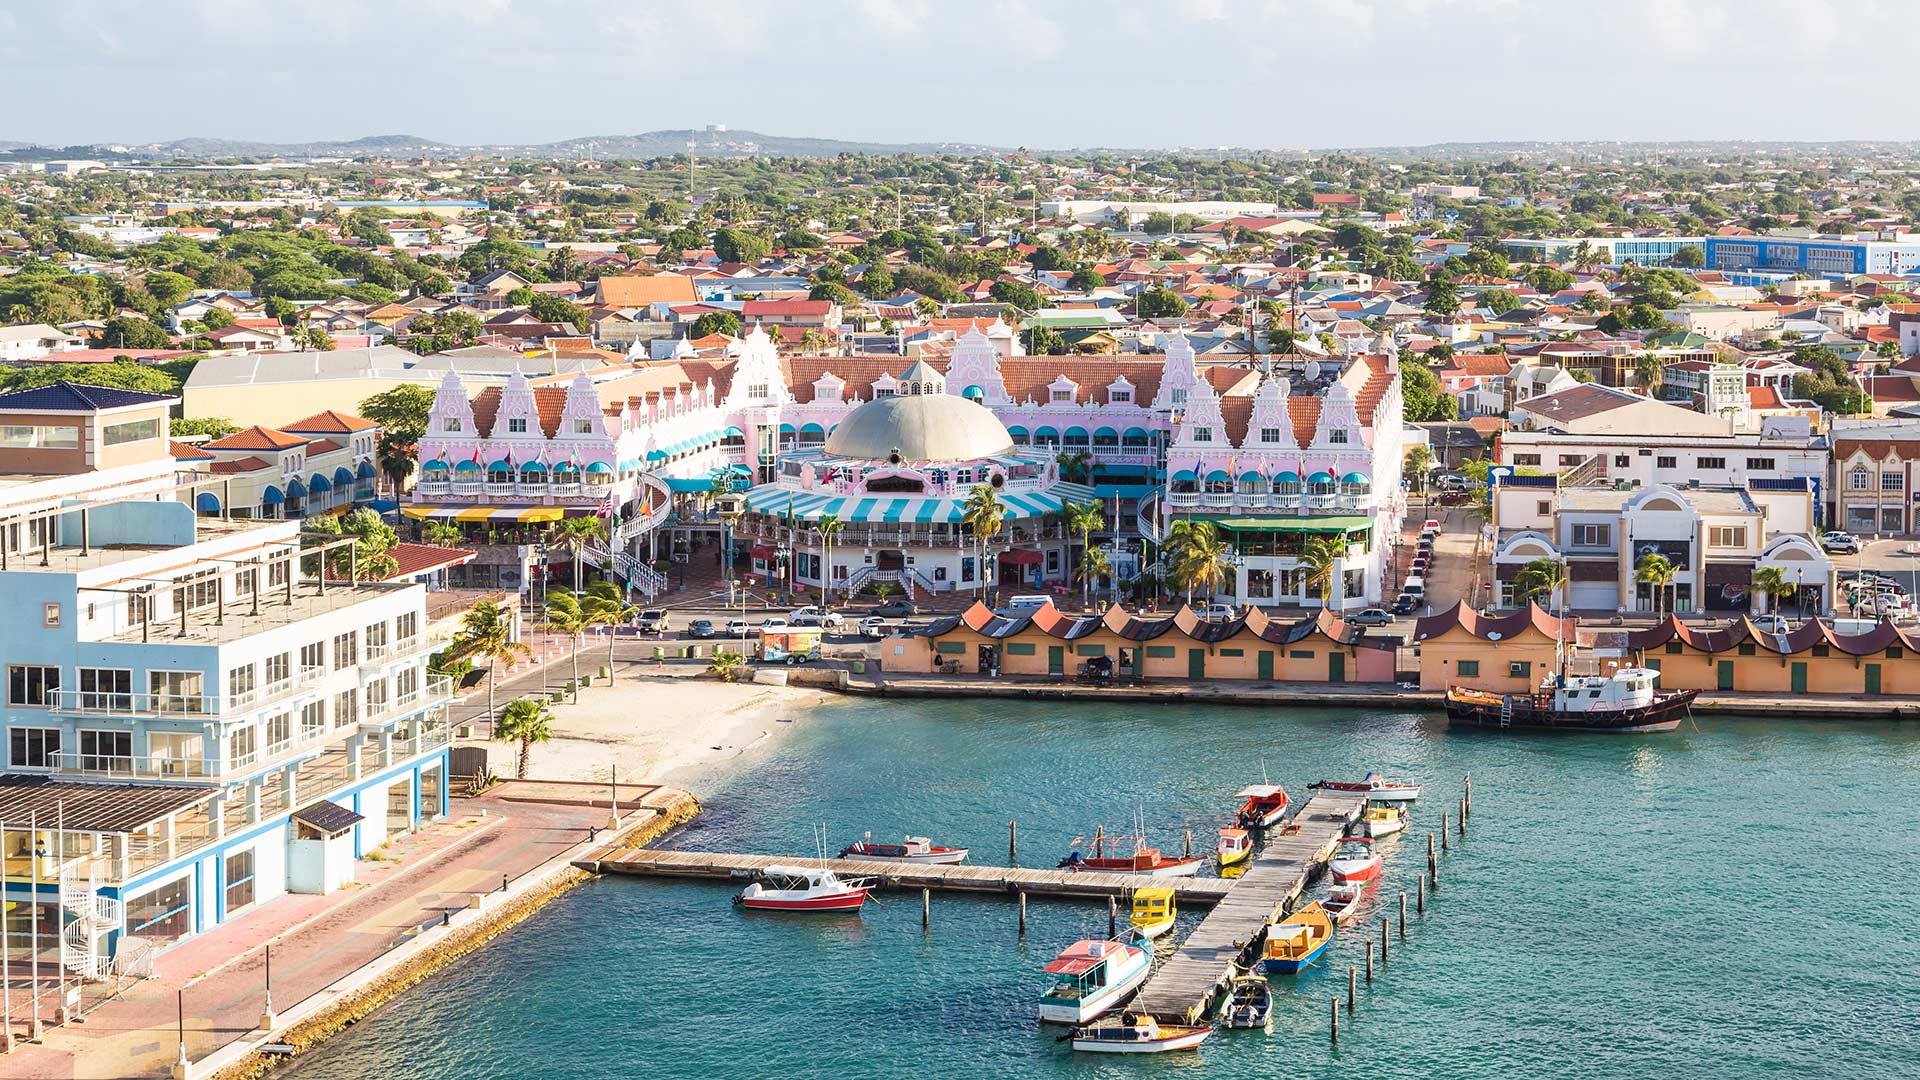 Downtown harbor and waterfront in Oranjestad